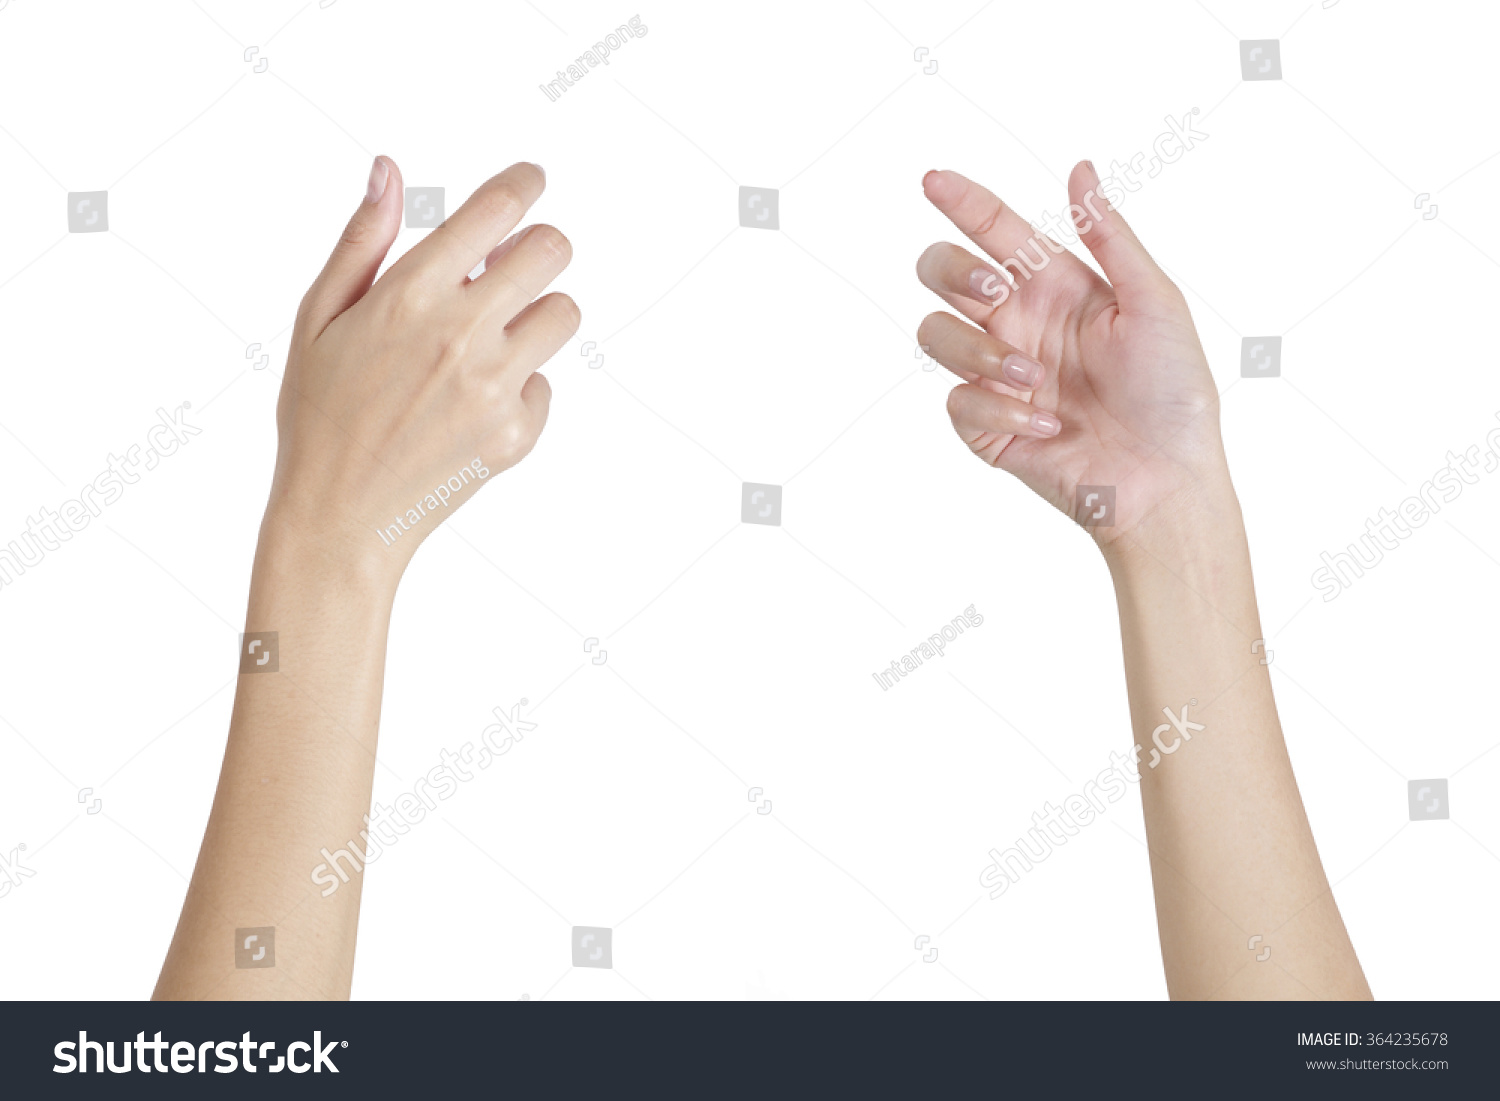 Woman's hands holding something empty front and back side, isolated on white background. #364235678